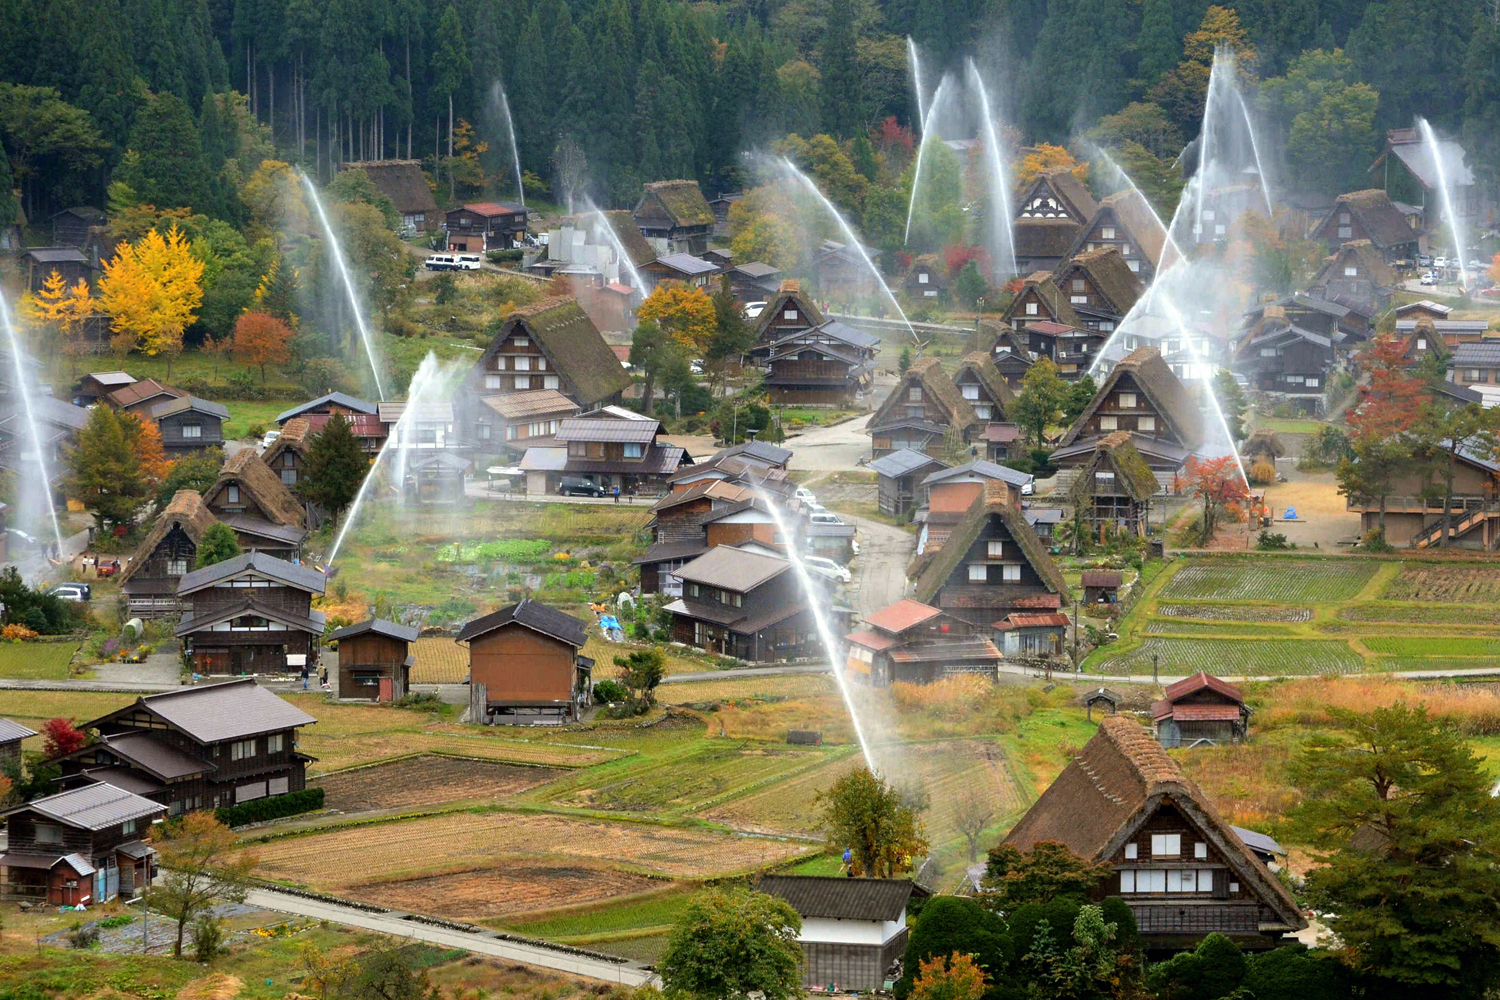 Image: Nov. 4, 2012. Water is discharged at the Shirakawa-go World Heritage in Shirakawa, Gifu, Japan. This annual drill is held to prevent fire.